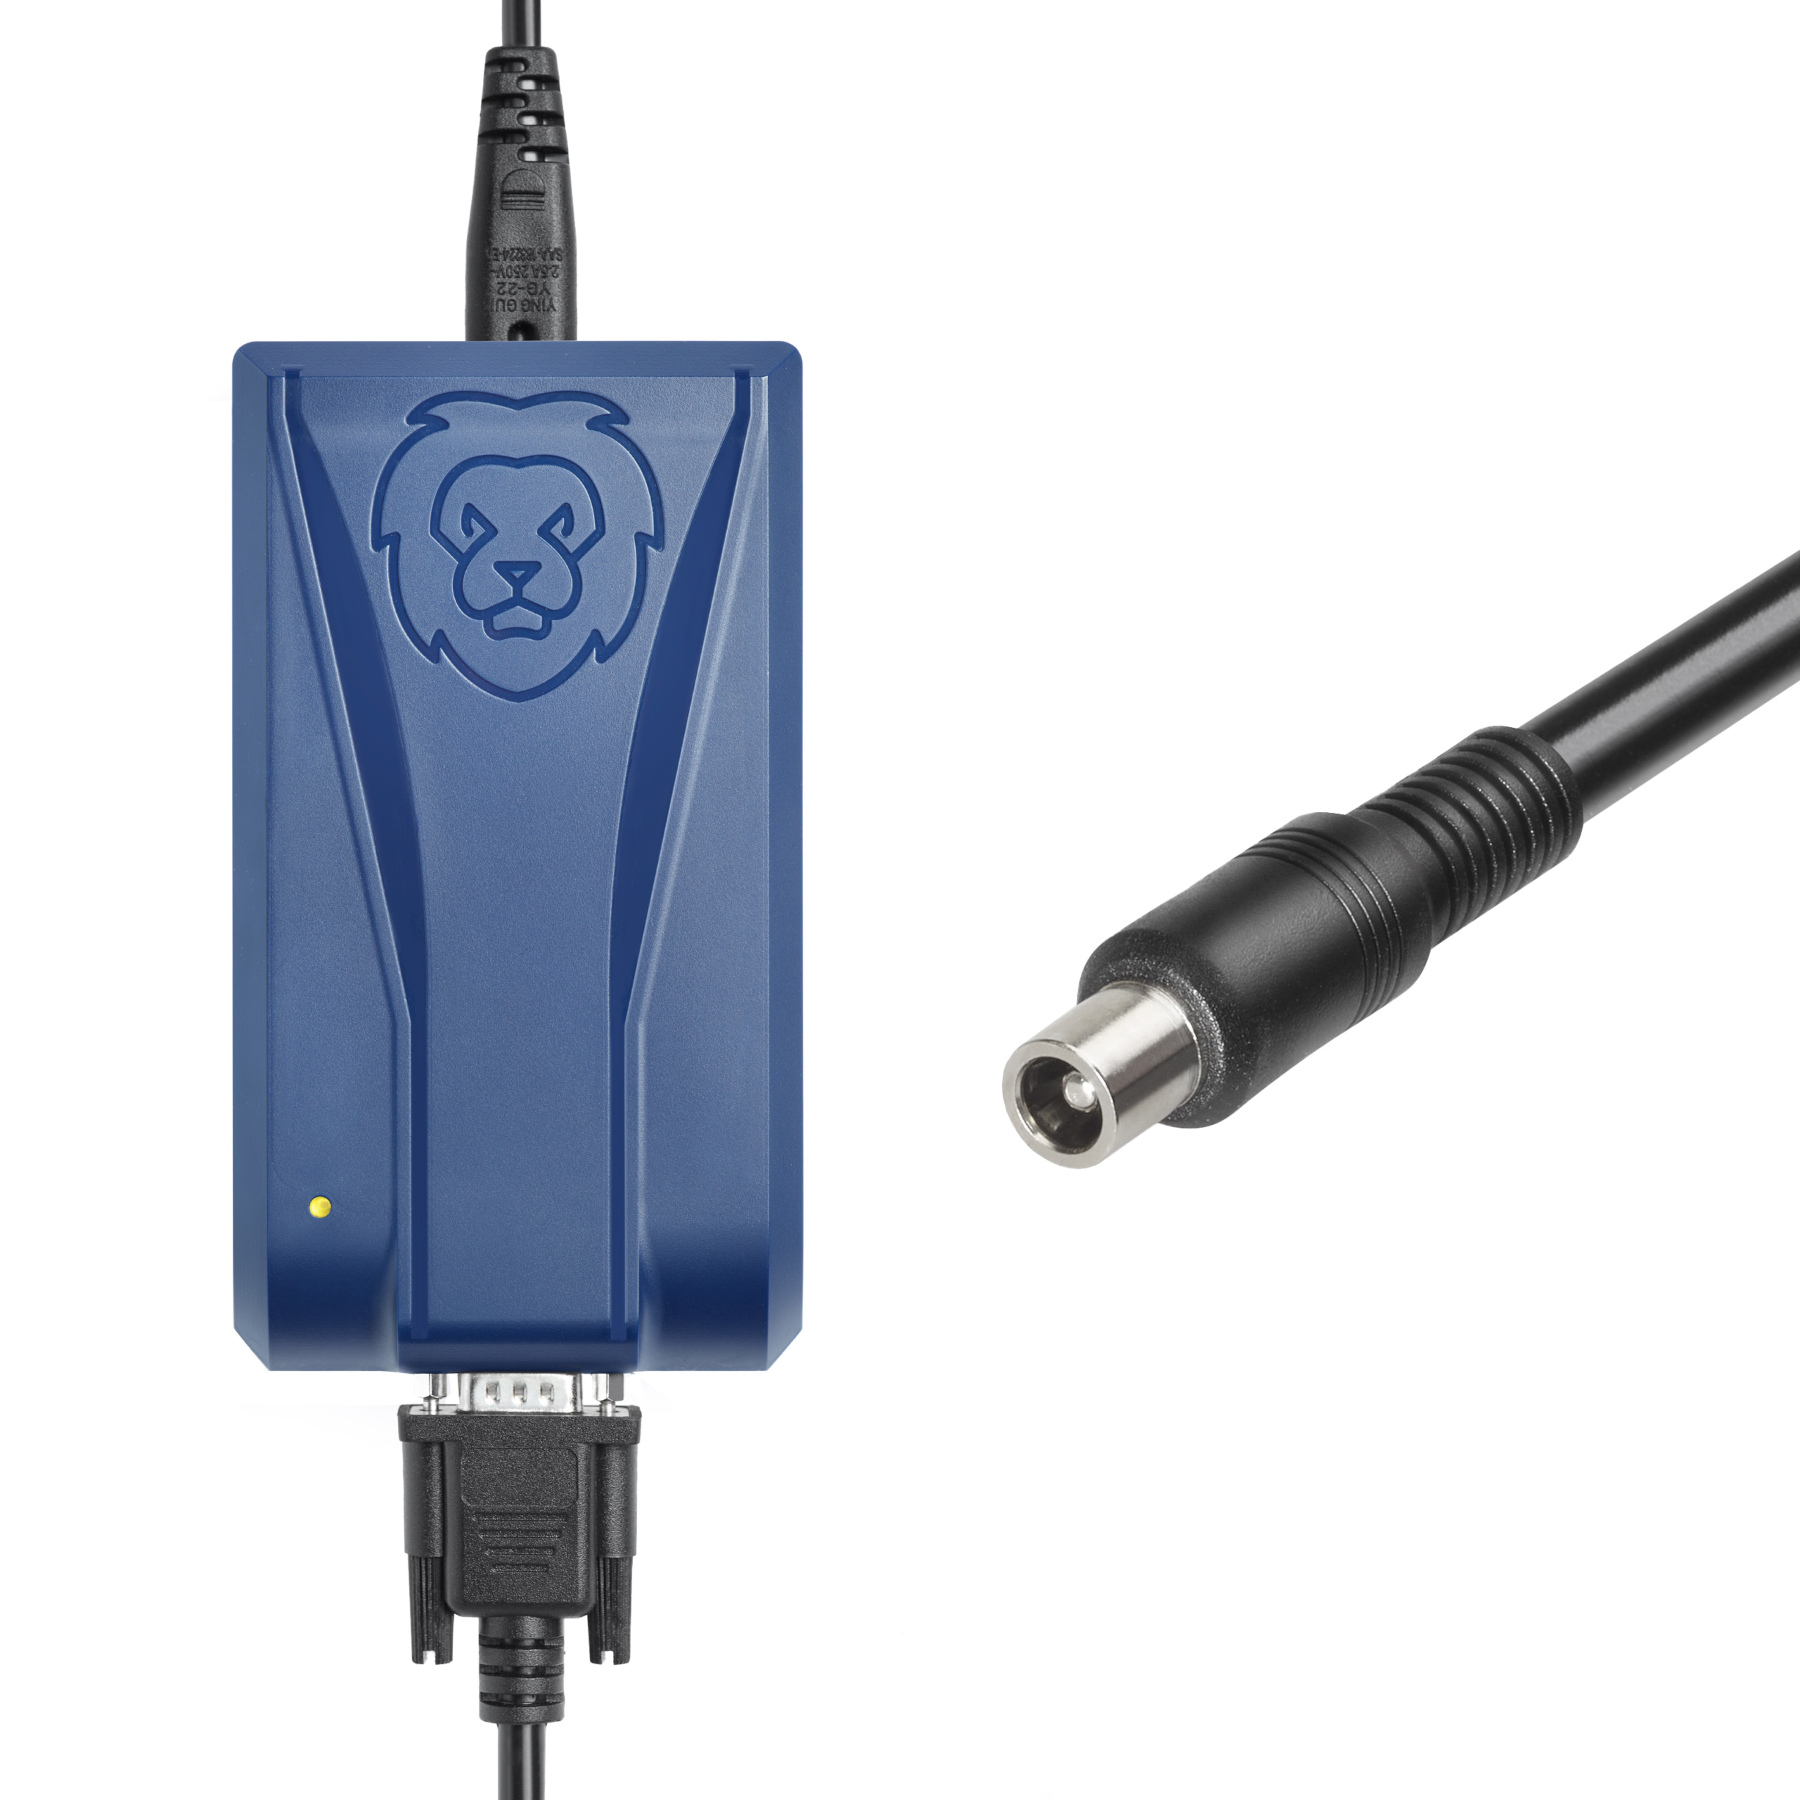 Productfoto van ONgineer LiON Smart Charger 36V - Coaxial 8 x 9